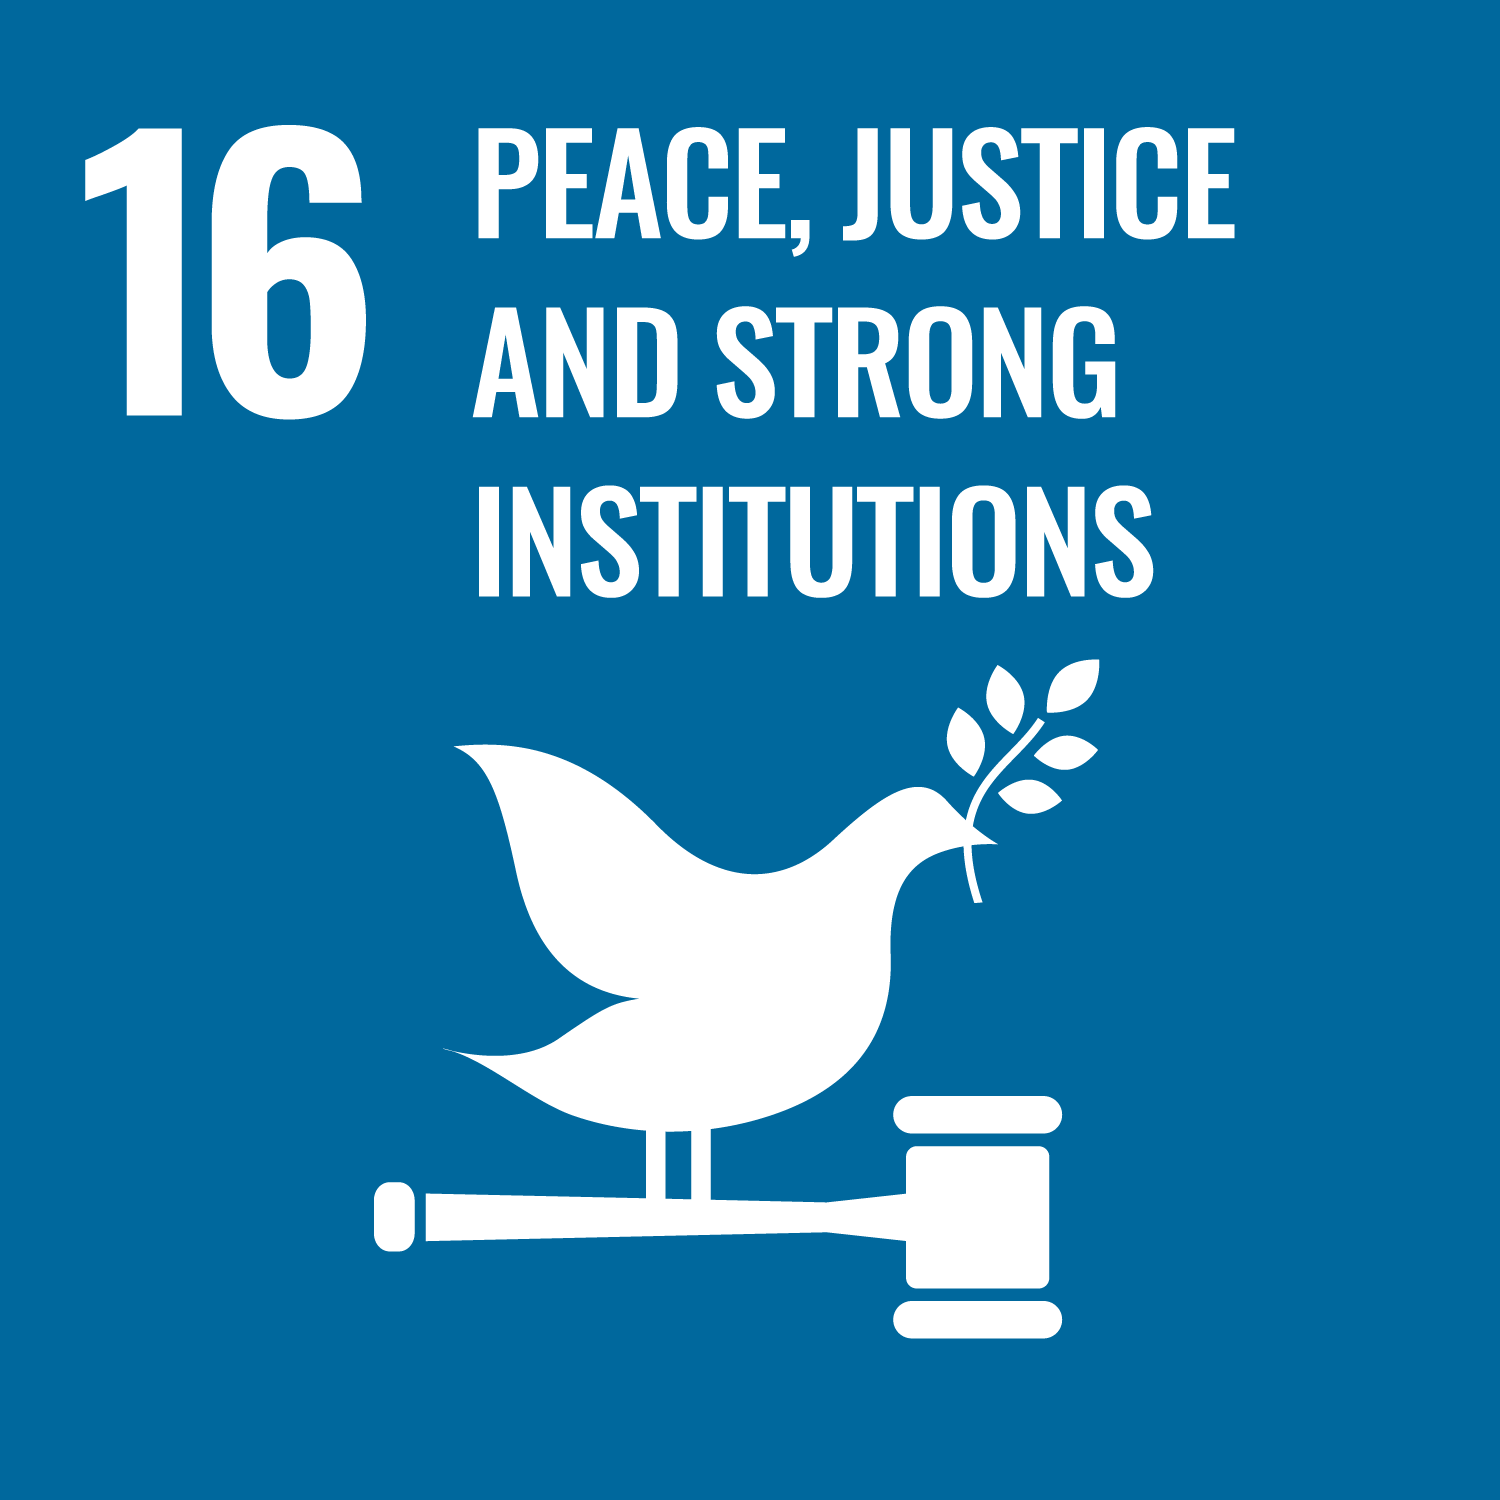 SDG16 - Peace, justice and strong institutions